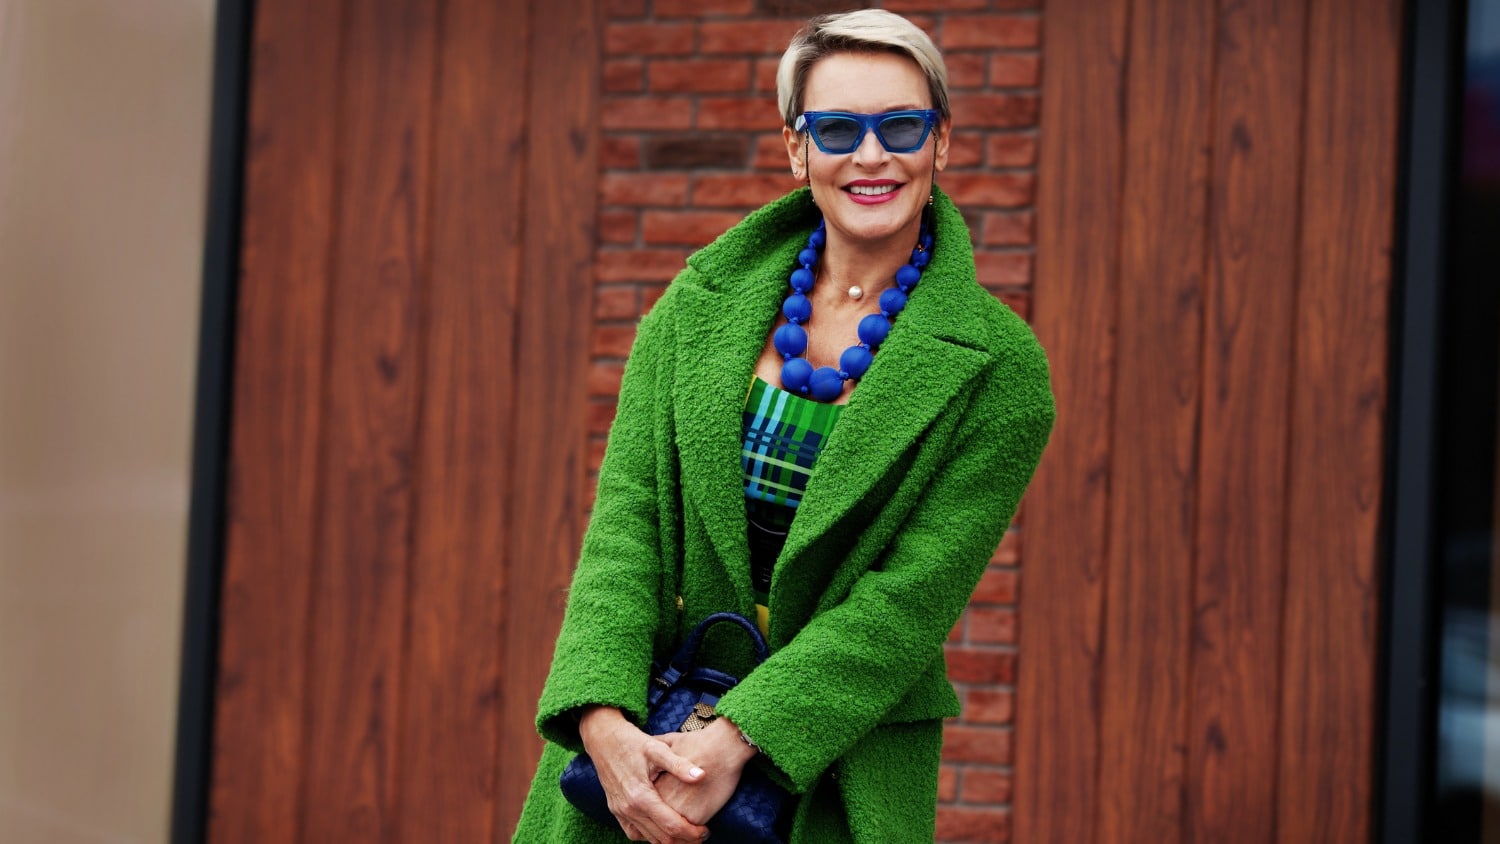 Fashion Over 50: Our 25 Favorite Fashion Bloggers You Should Follow